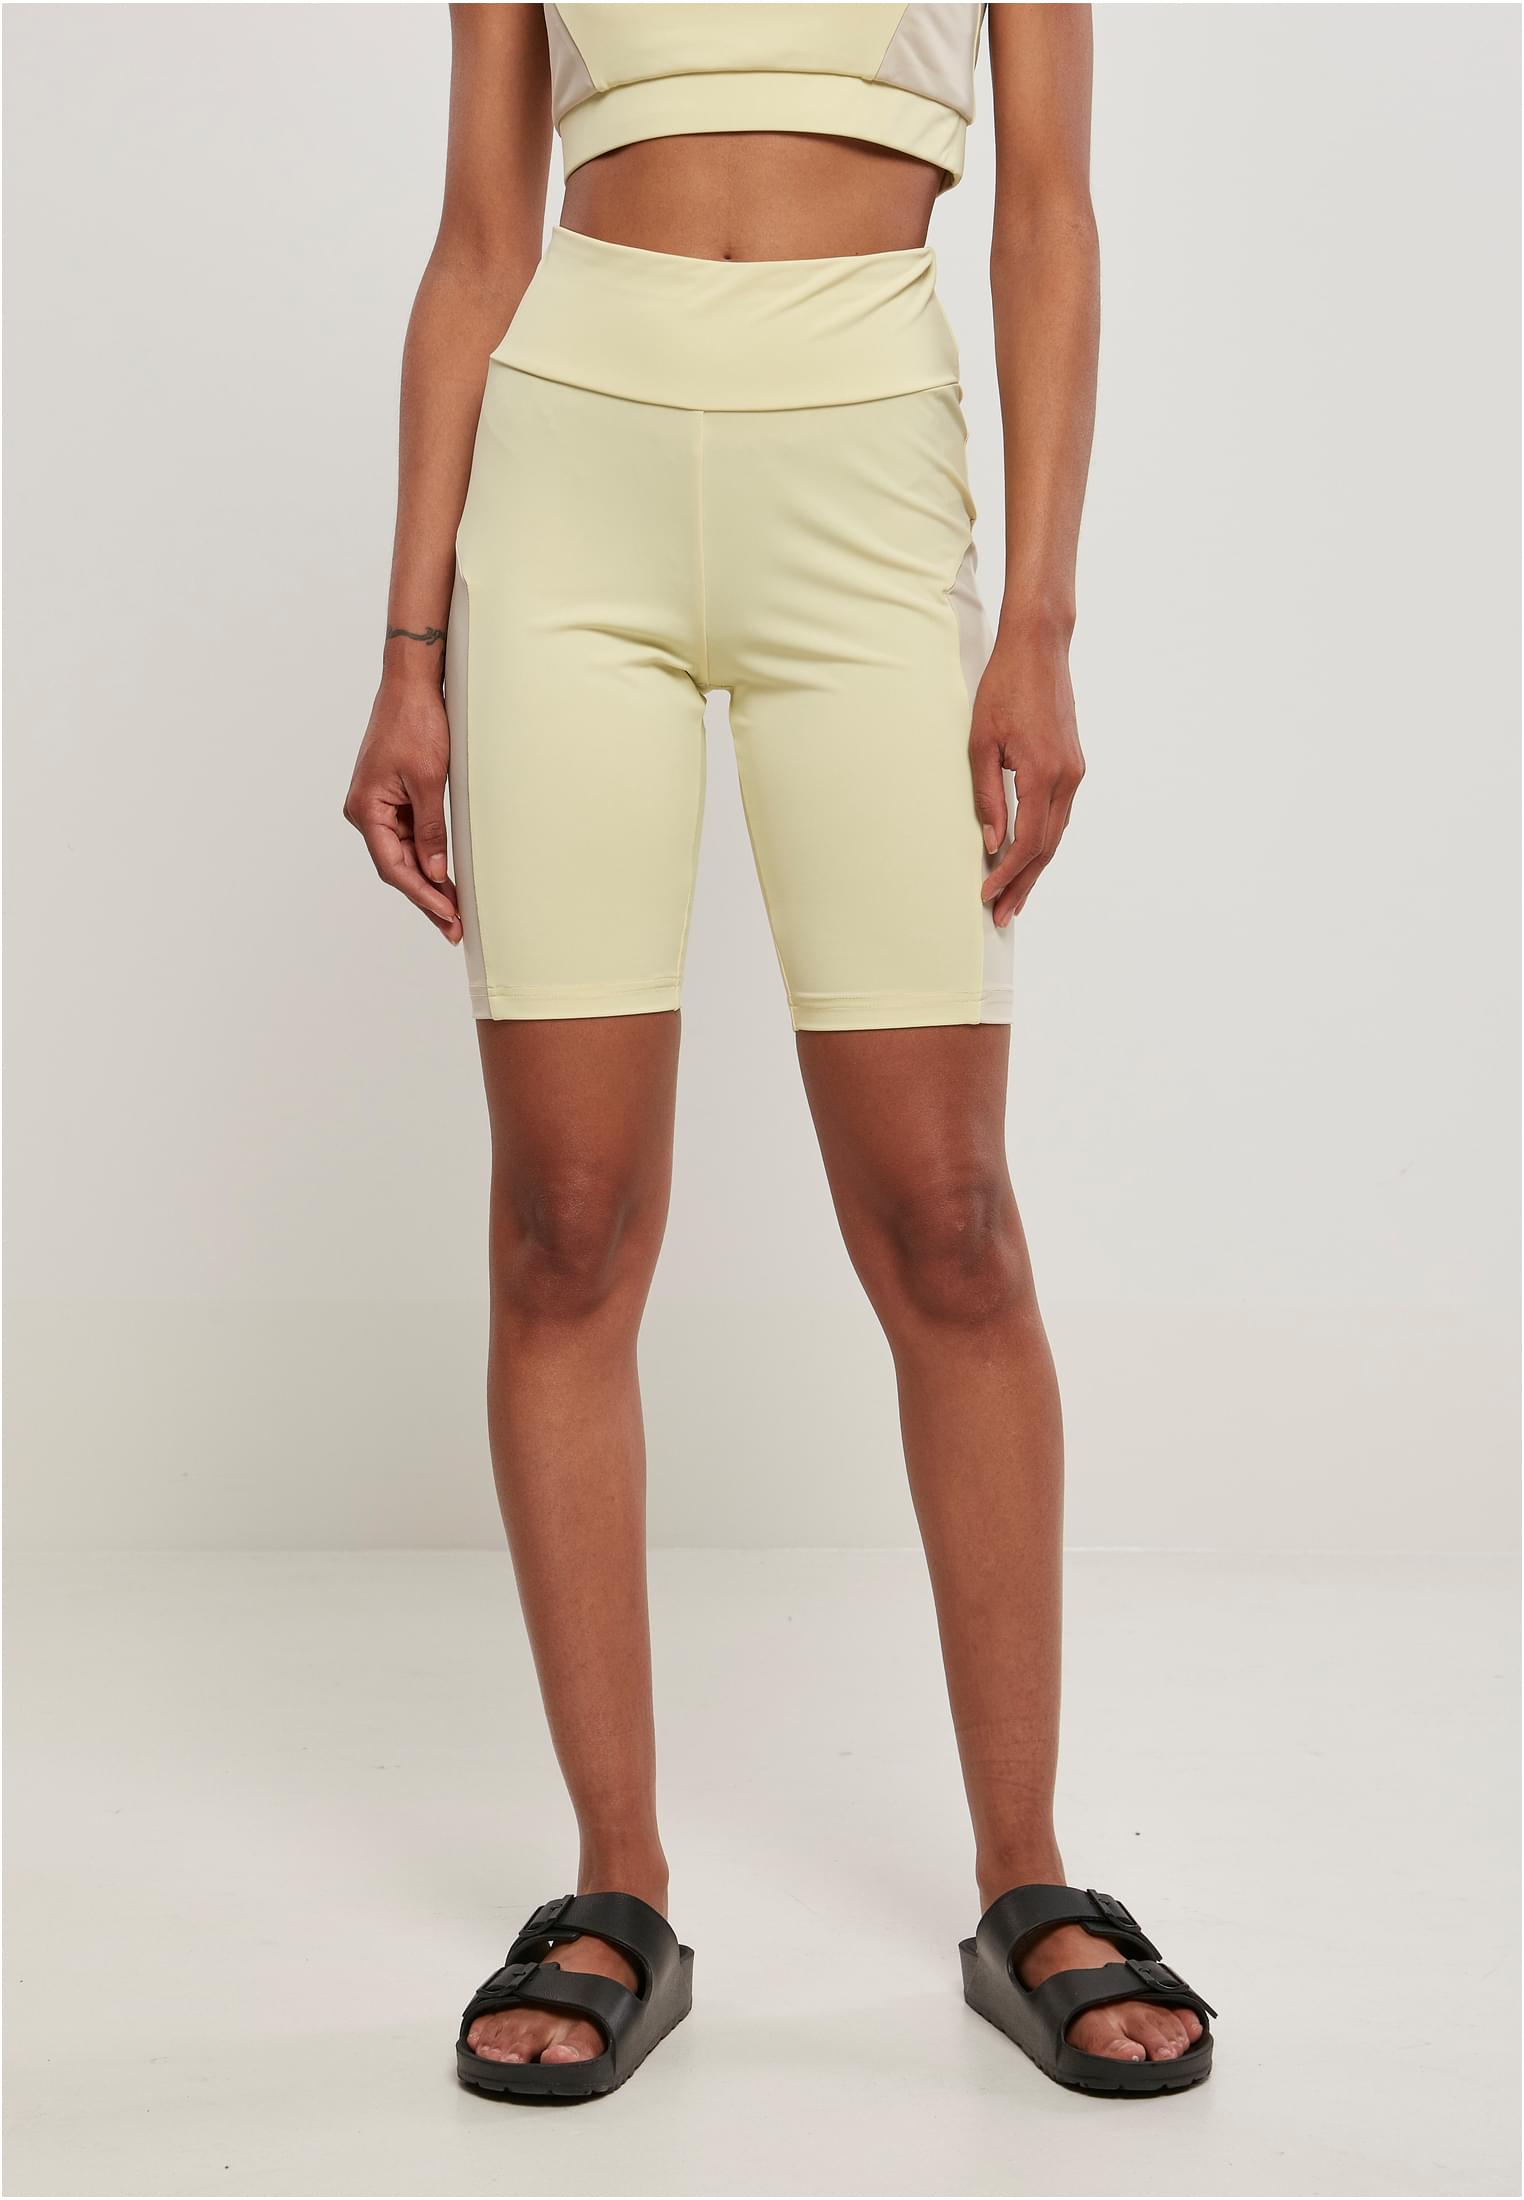 Women's Color Block Cycle Shorts softyellow/softseagrass